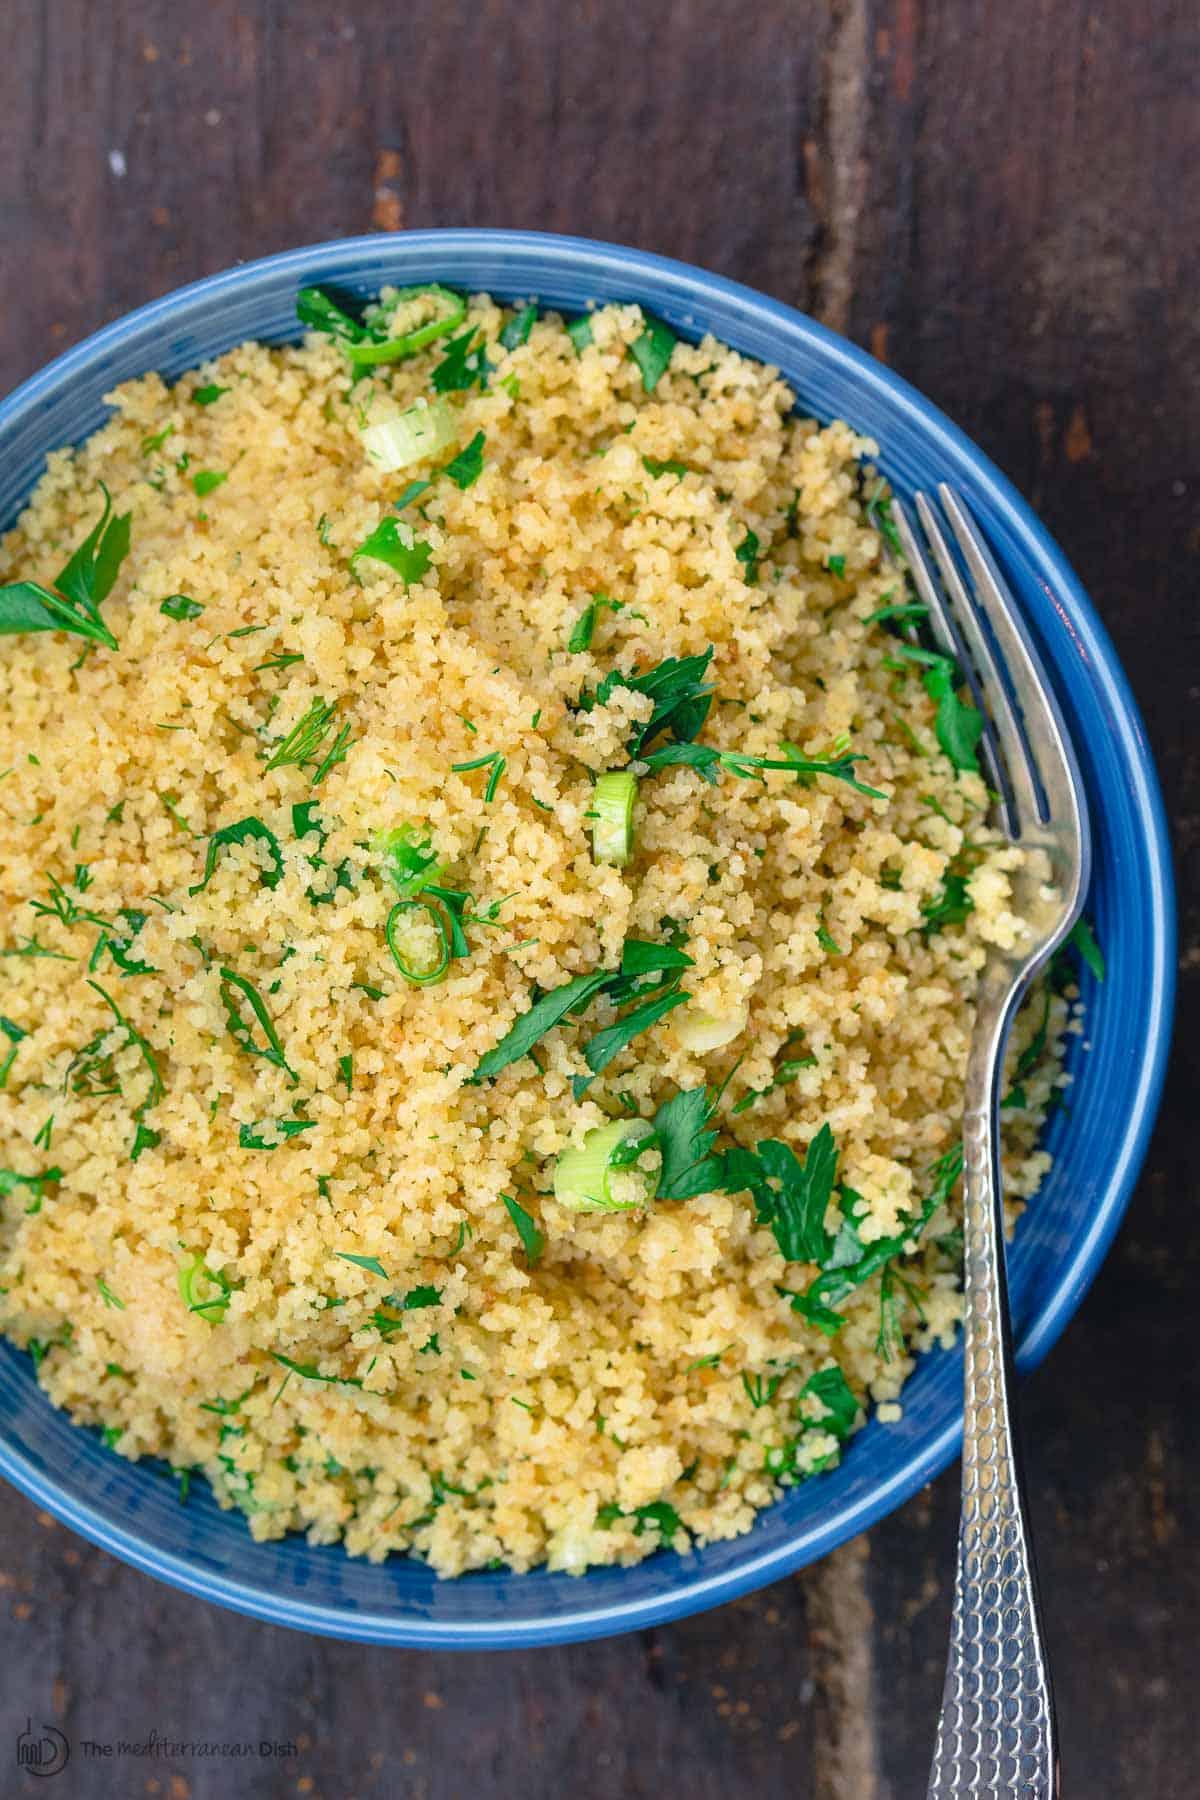 Cooked couscous in serving bowl, garnished with fresh herbs